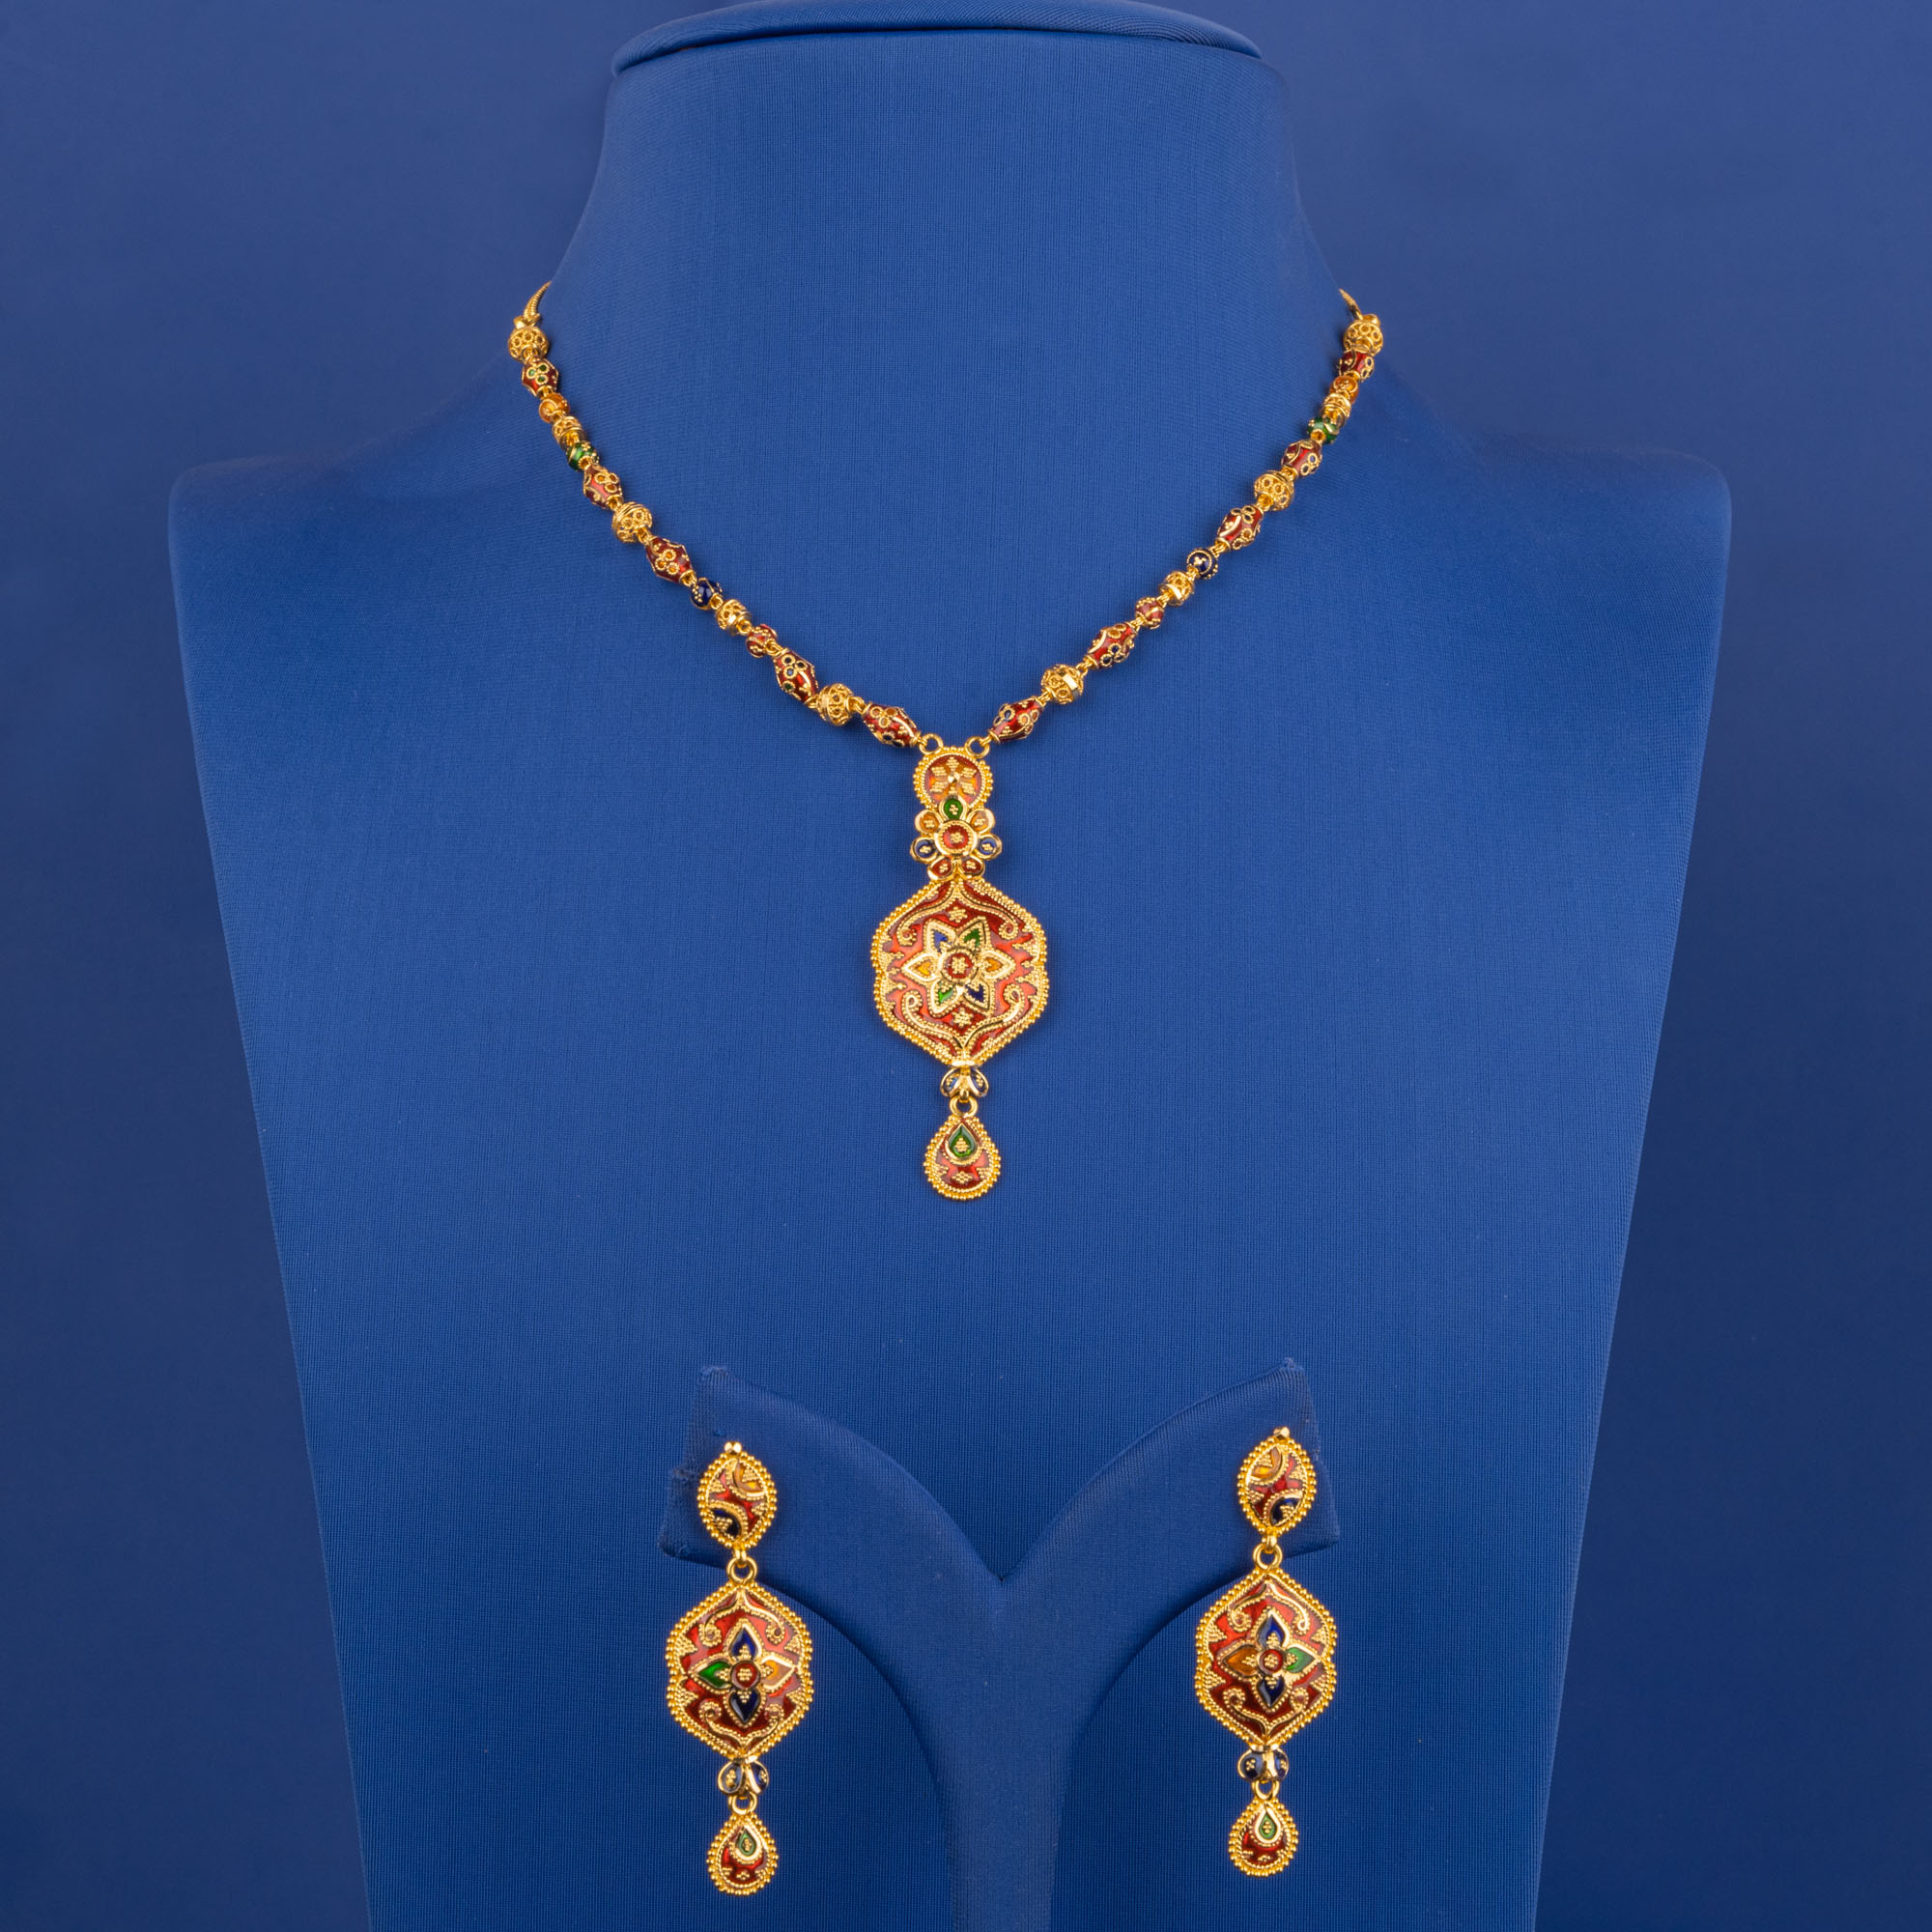 Celestial Treasures: Handcrafted 22K Gold Minakari Necklace and Earrings Set